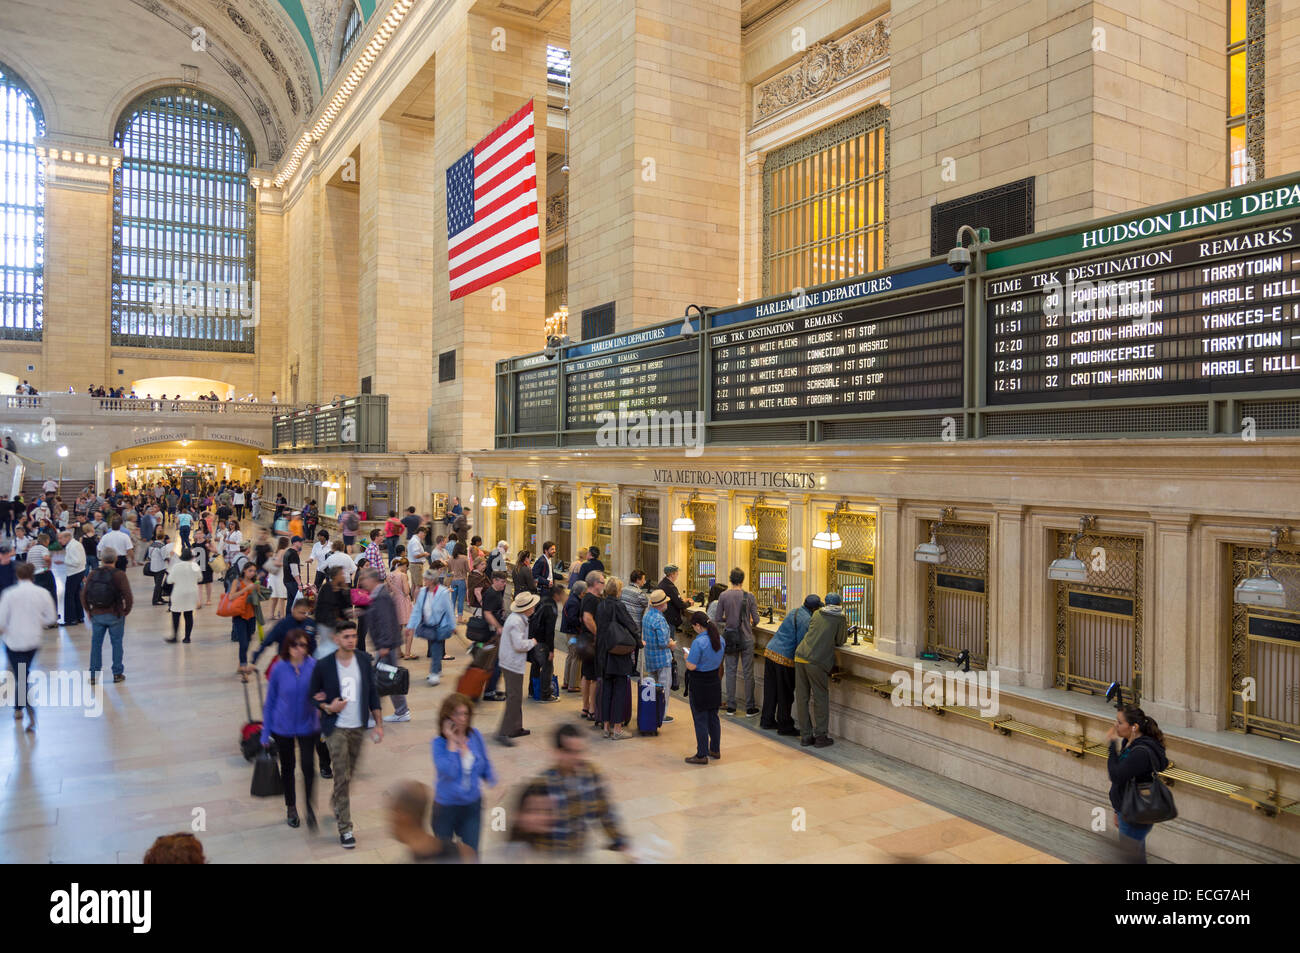 Innenraum des Grand Central Terminal, Midtown in New York City Stockfoto